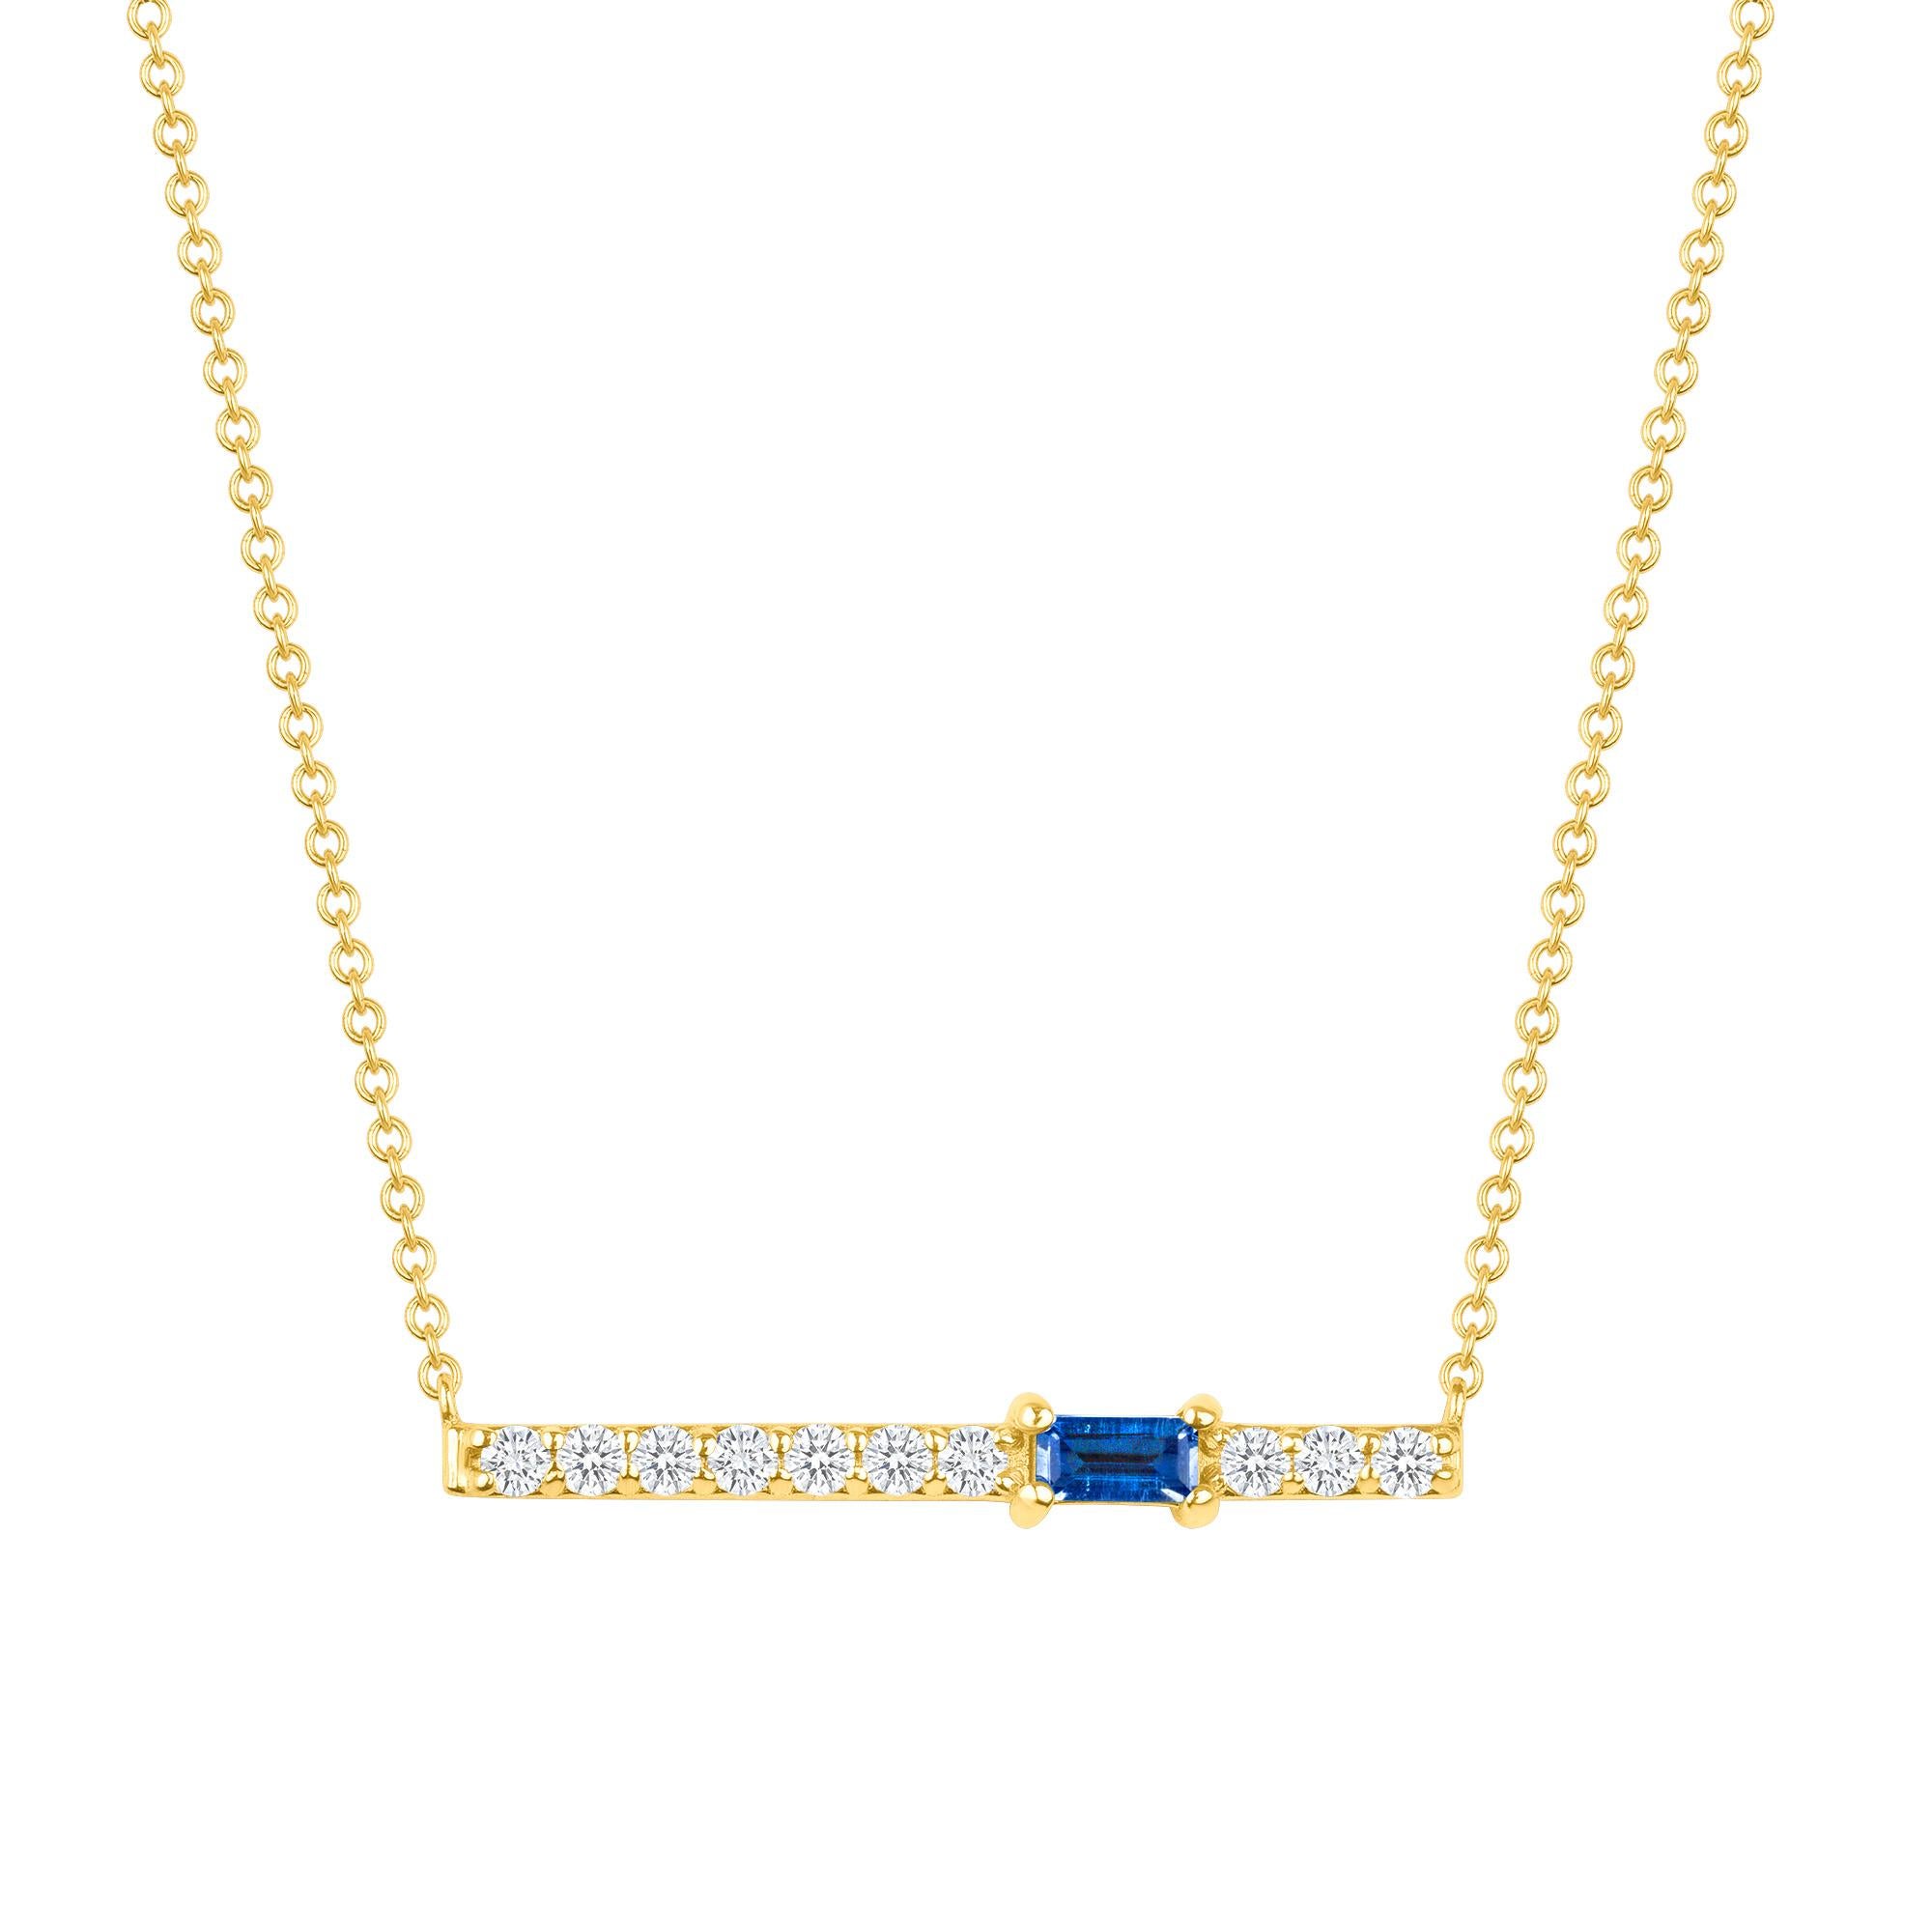 Crafted in 14K gold, round glistening diamonds enclose a baguette blue sapphire gemstone on this contemporary bar pendant. This stunning necklace is a modern piece that sits elegantly above the collarbone making it the perfect necklace for layering